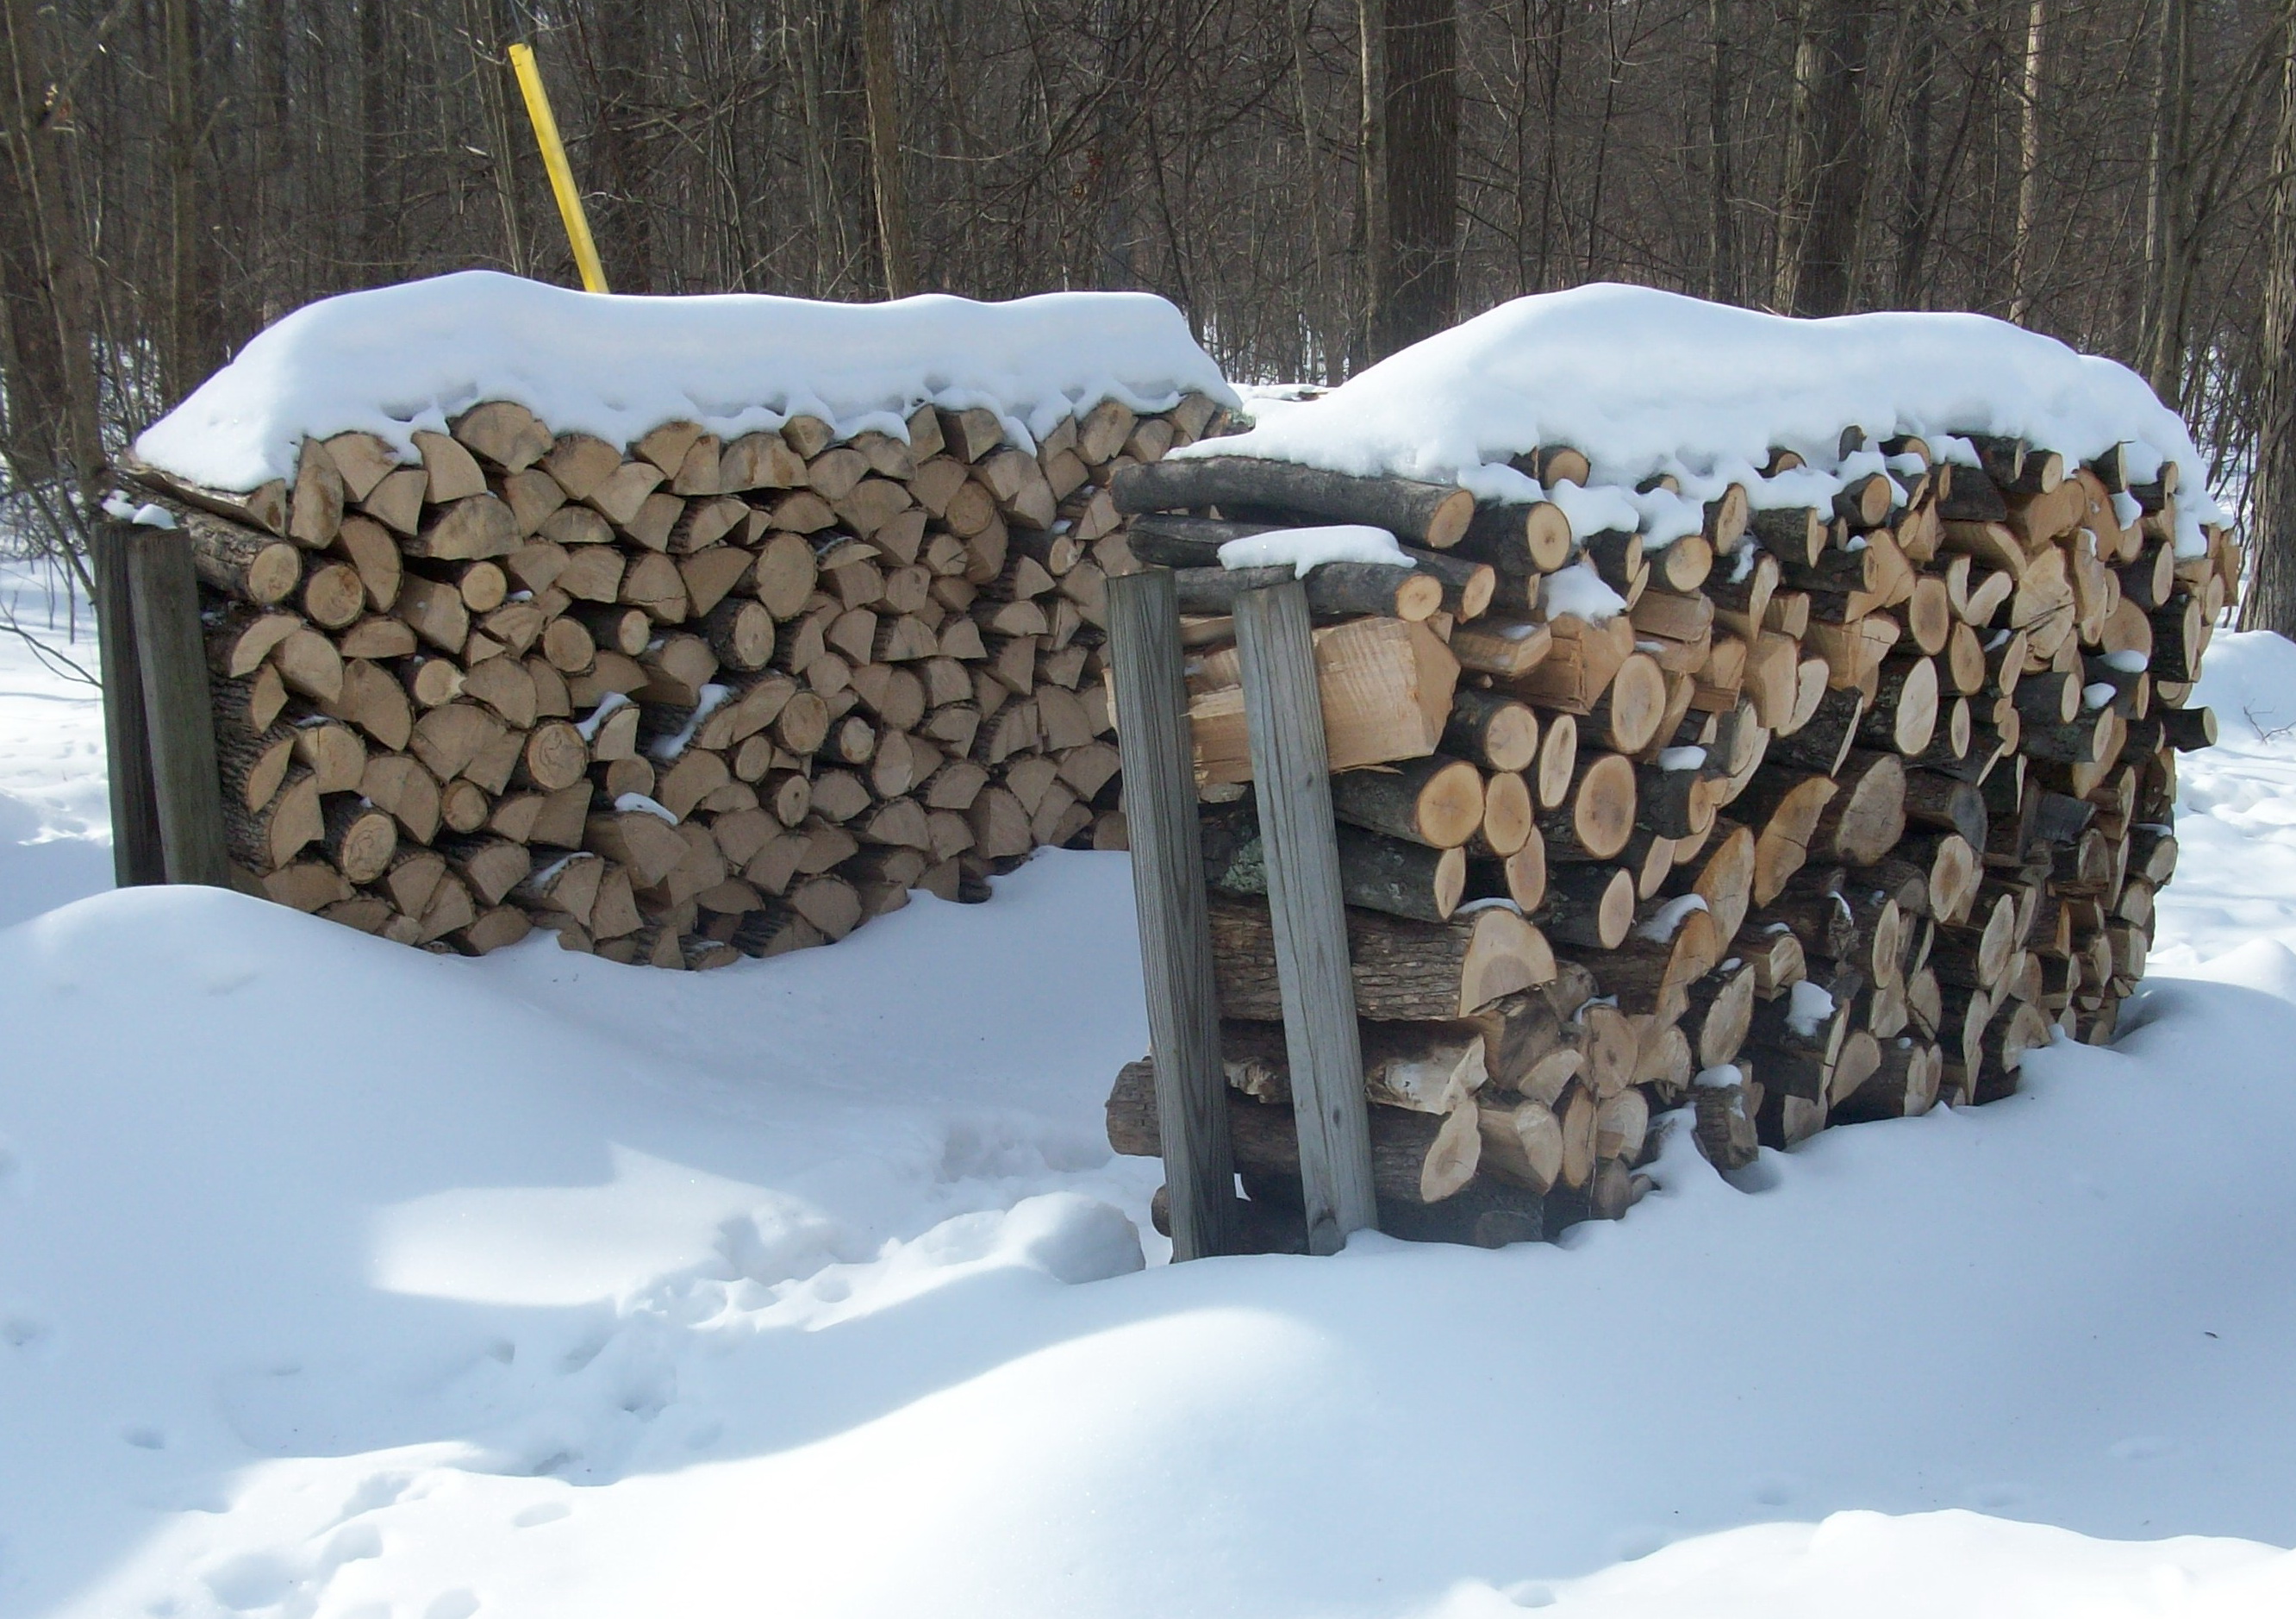 Helpful Lessons for Warm Fires in the 'Firewood Poem